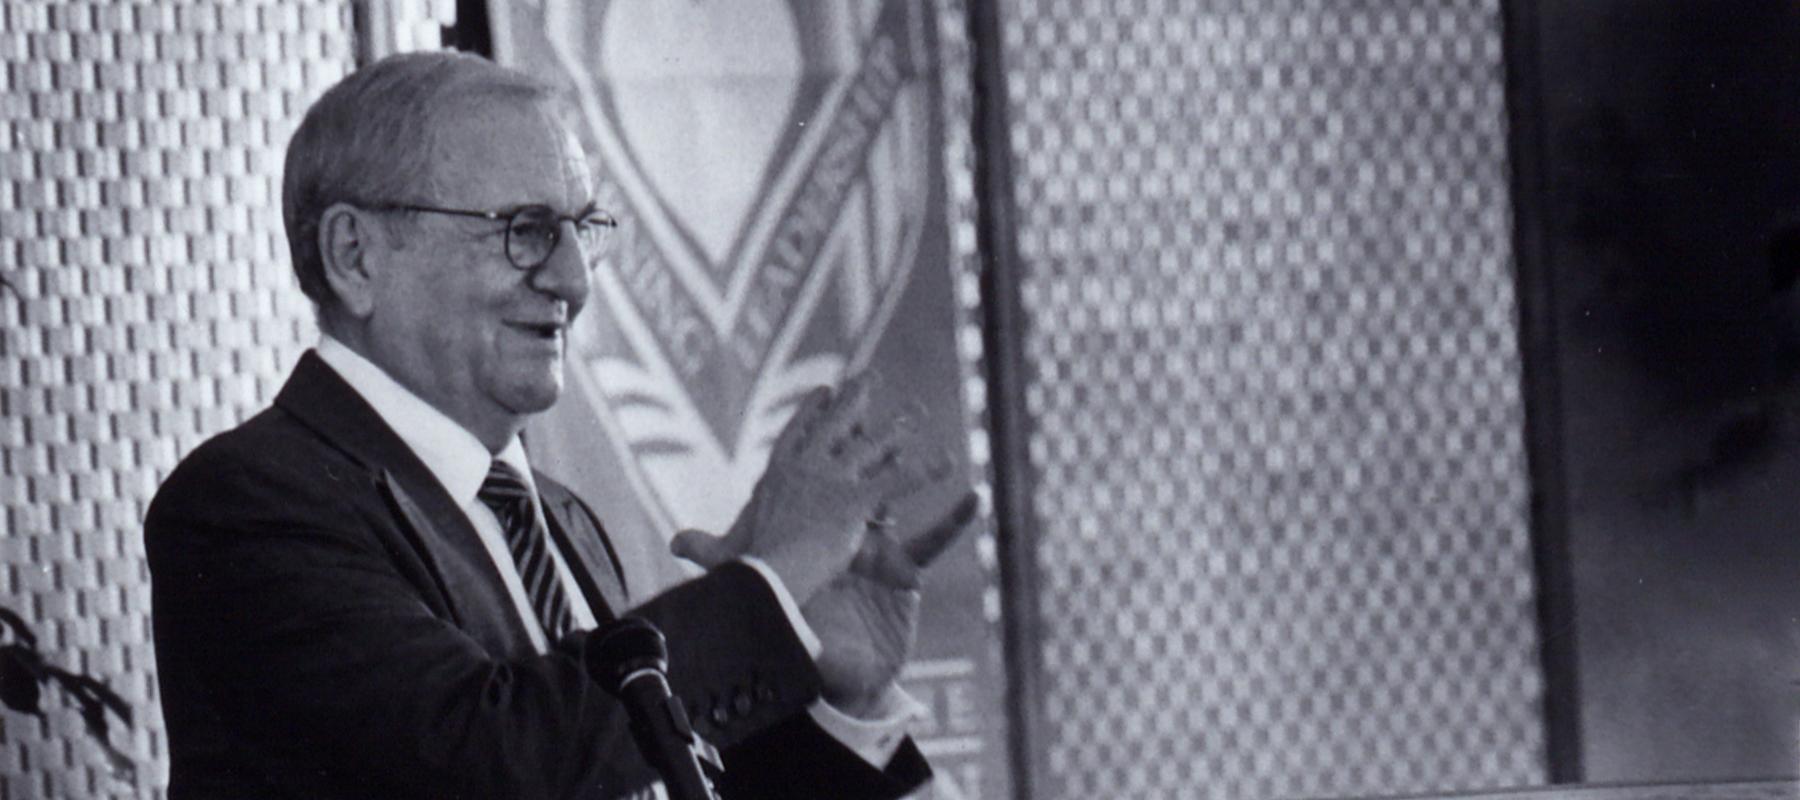 Lee Iacocca speaks at an event at Lehigh University